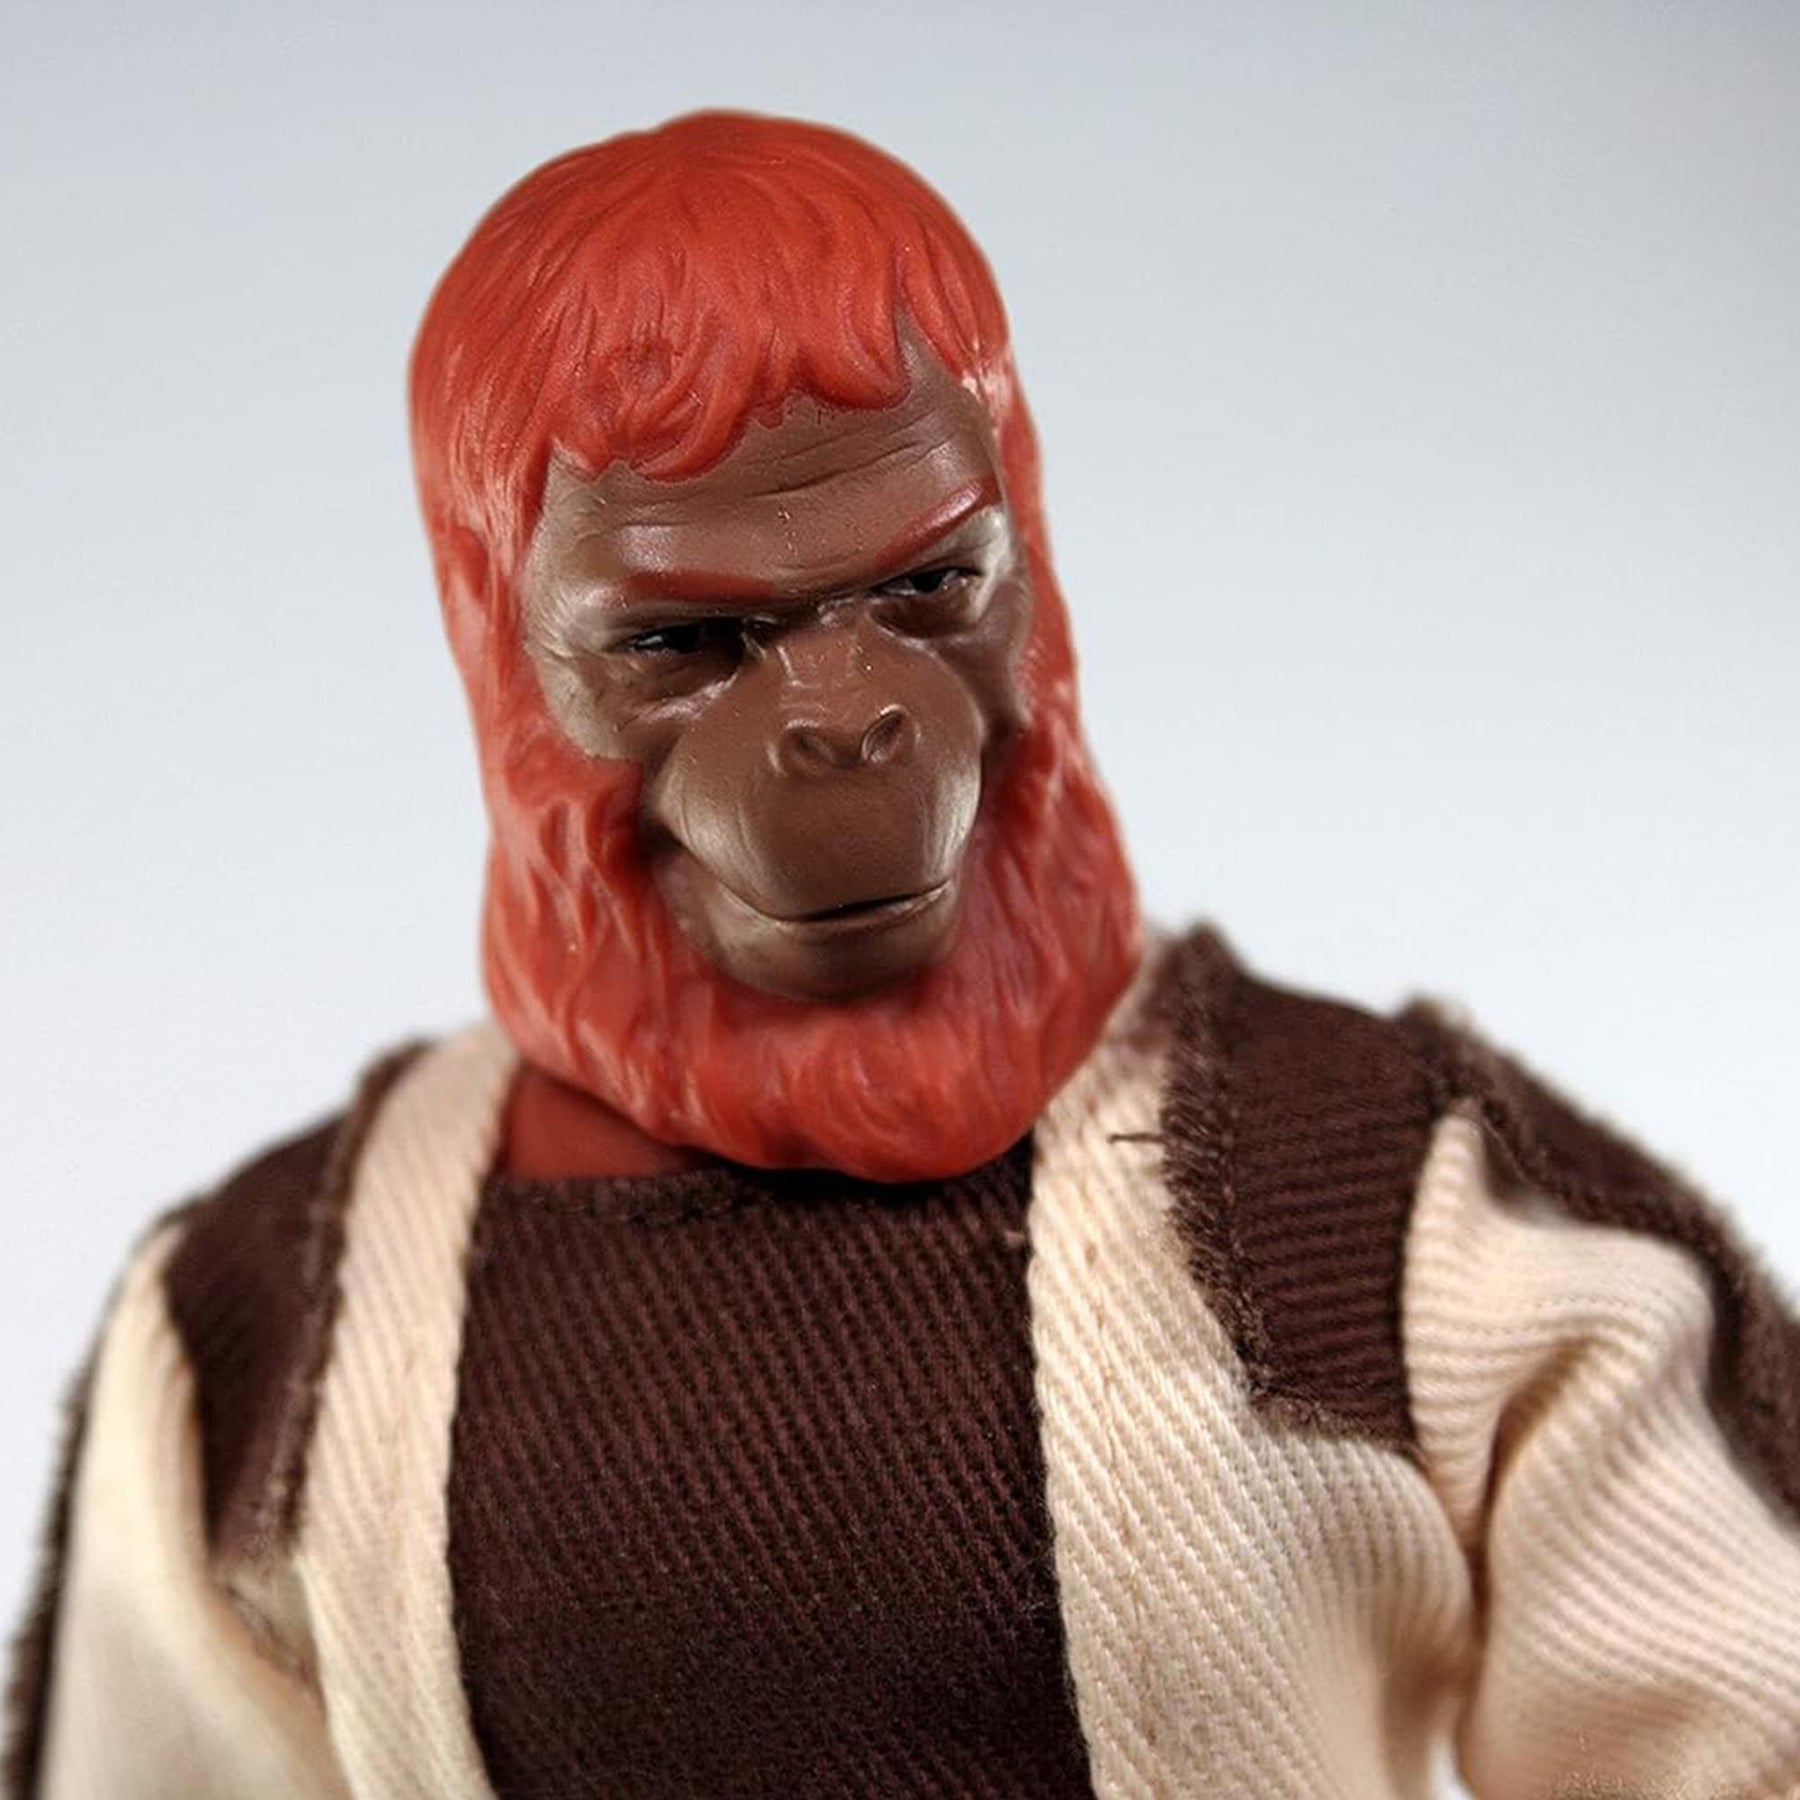 Mego Planet of the Apes Dr. Zaius 8 Inch Action Figure